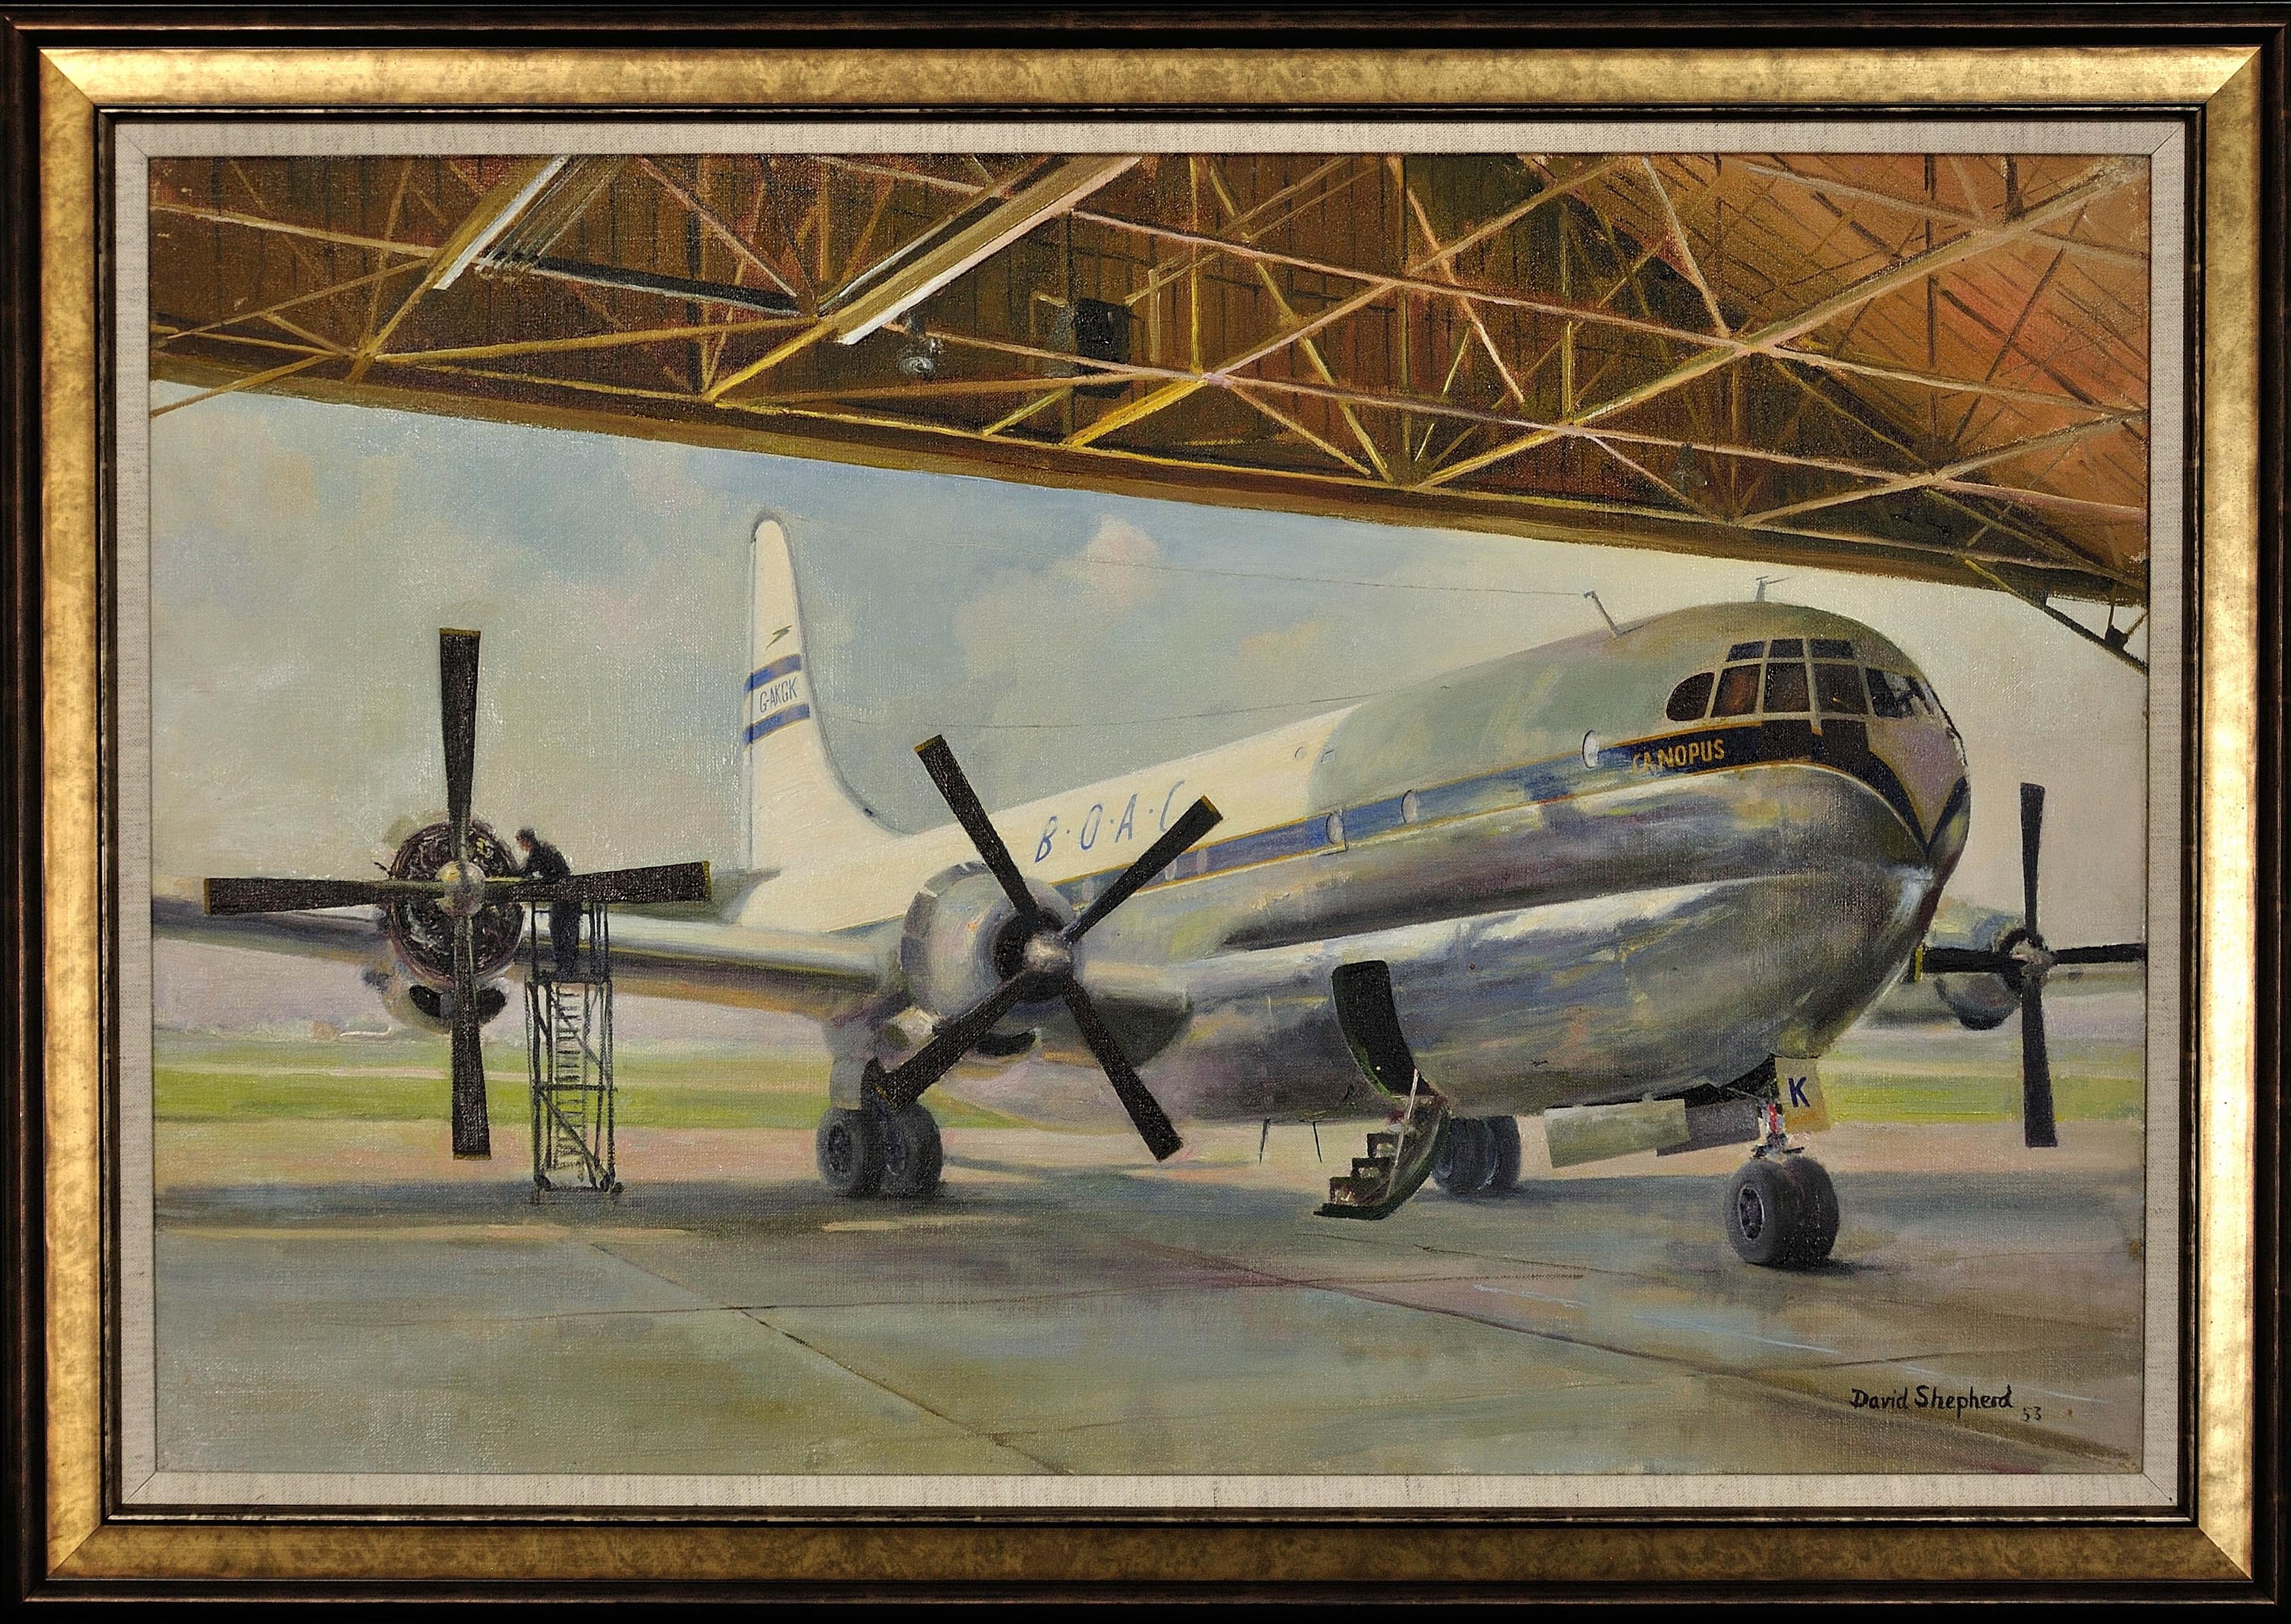 David Shepherd Landscape Painting - Giant Refreshed, 1953. BOAC Boeing 377 Stratocruiser, Canopus.Aircraft Aviation.